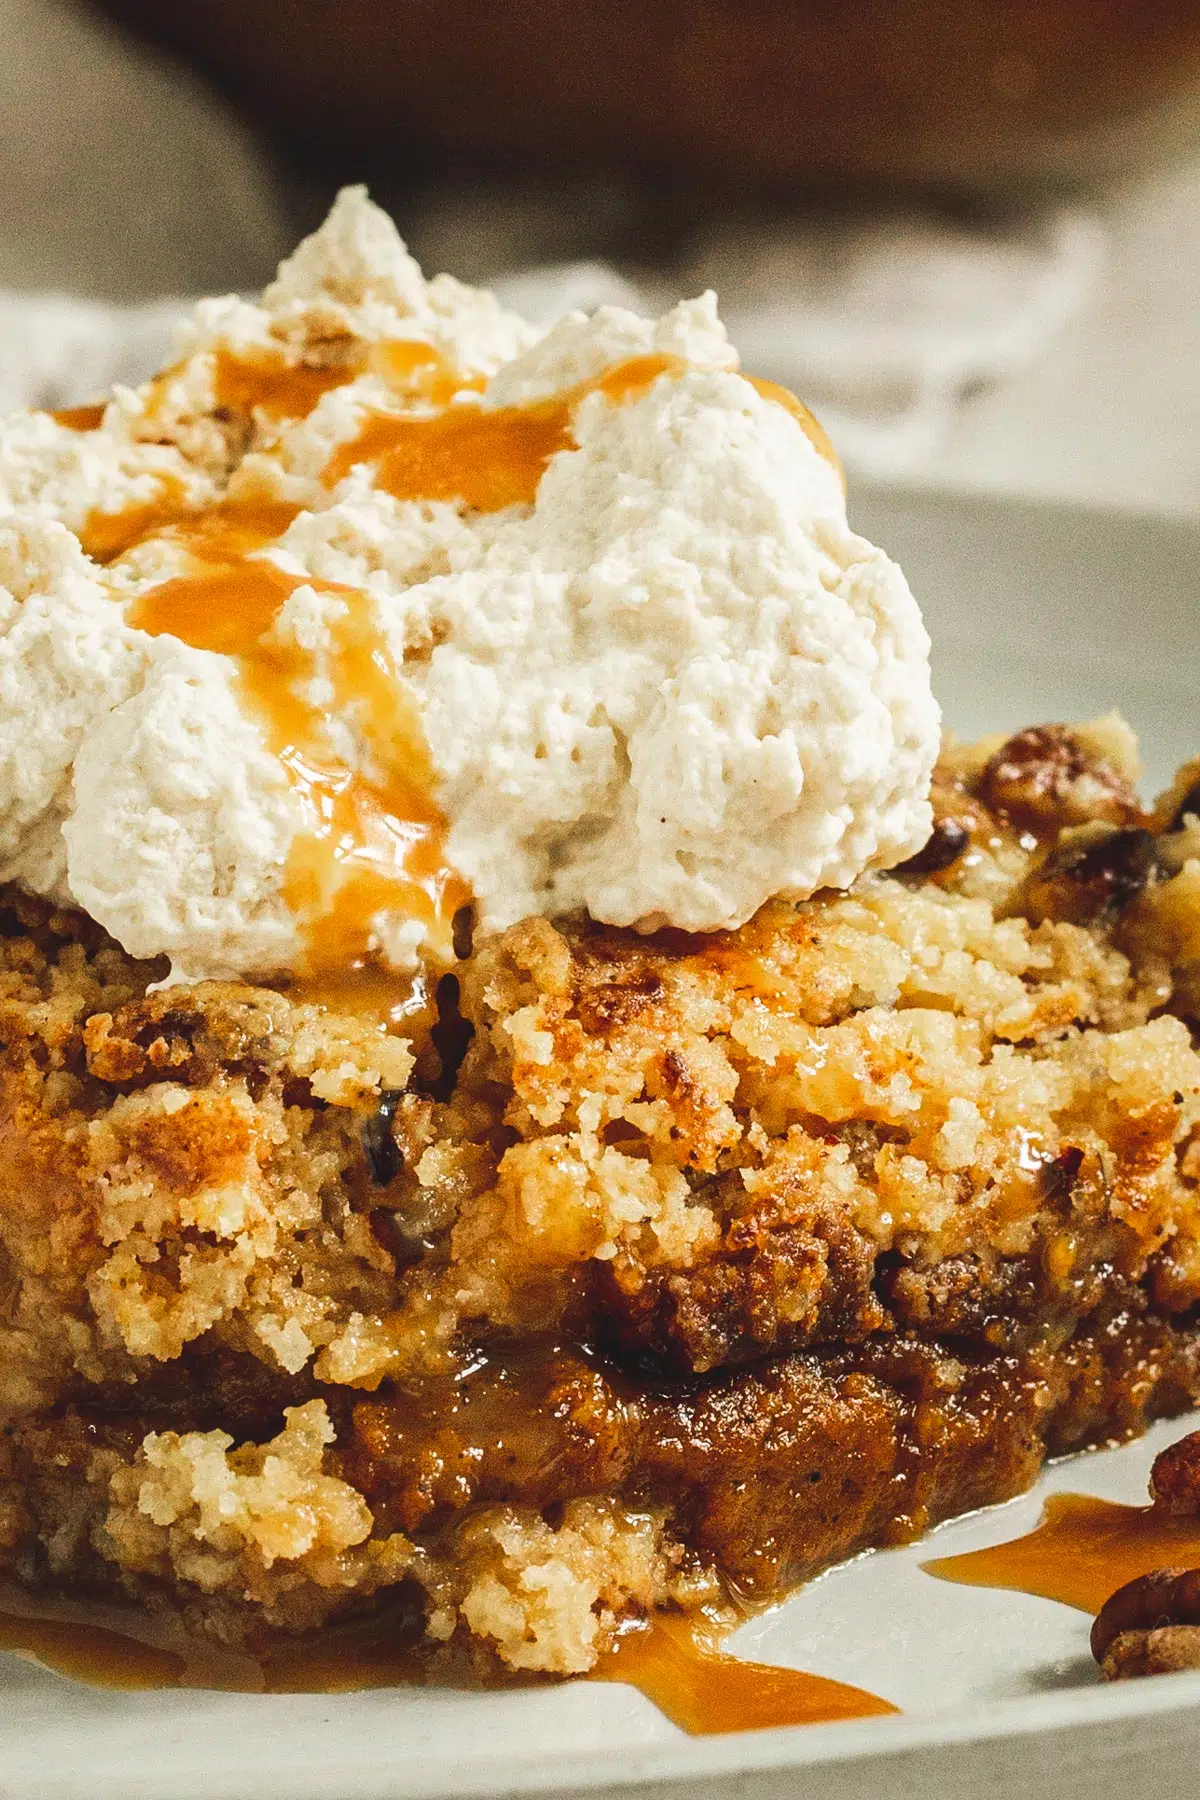 Pumpkin pie dump cake topped with whipped cream and caramel sauce.